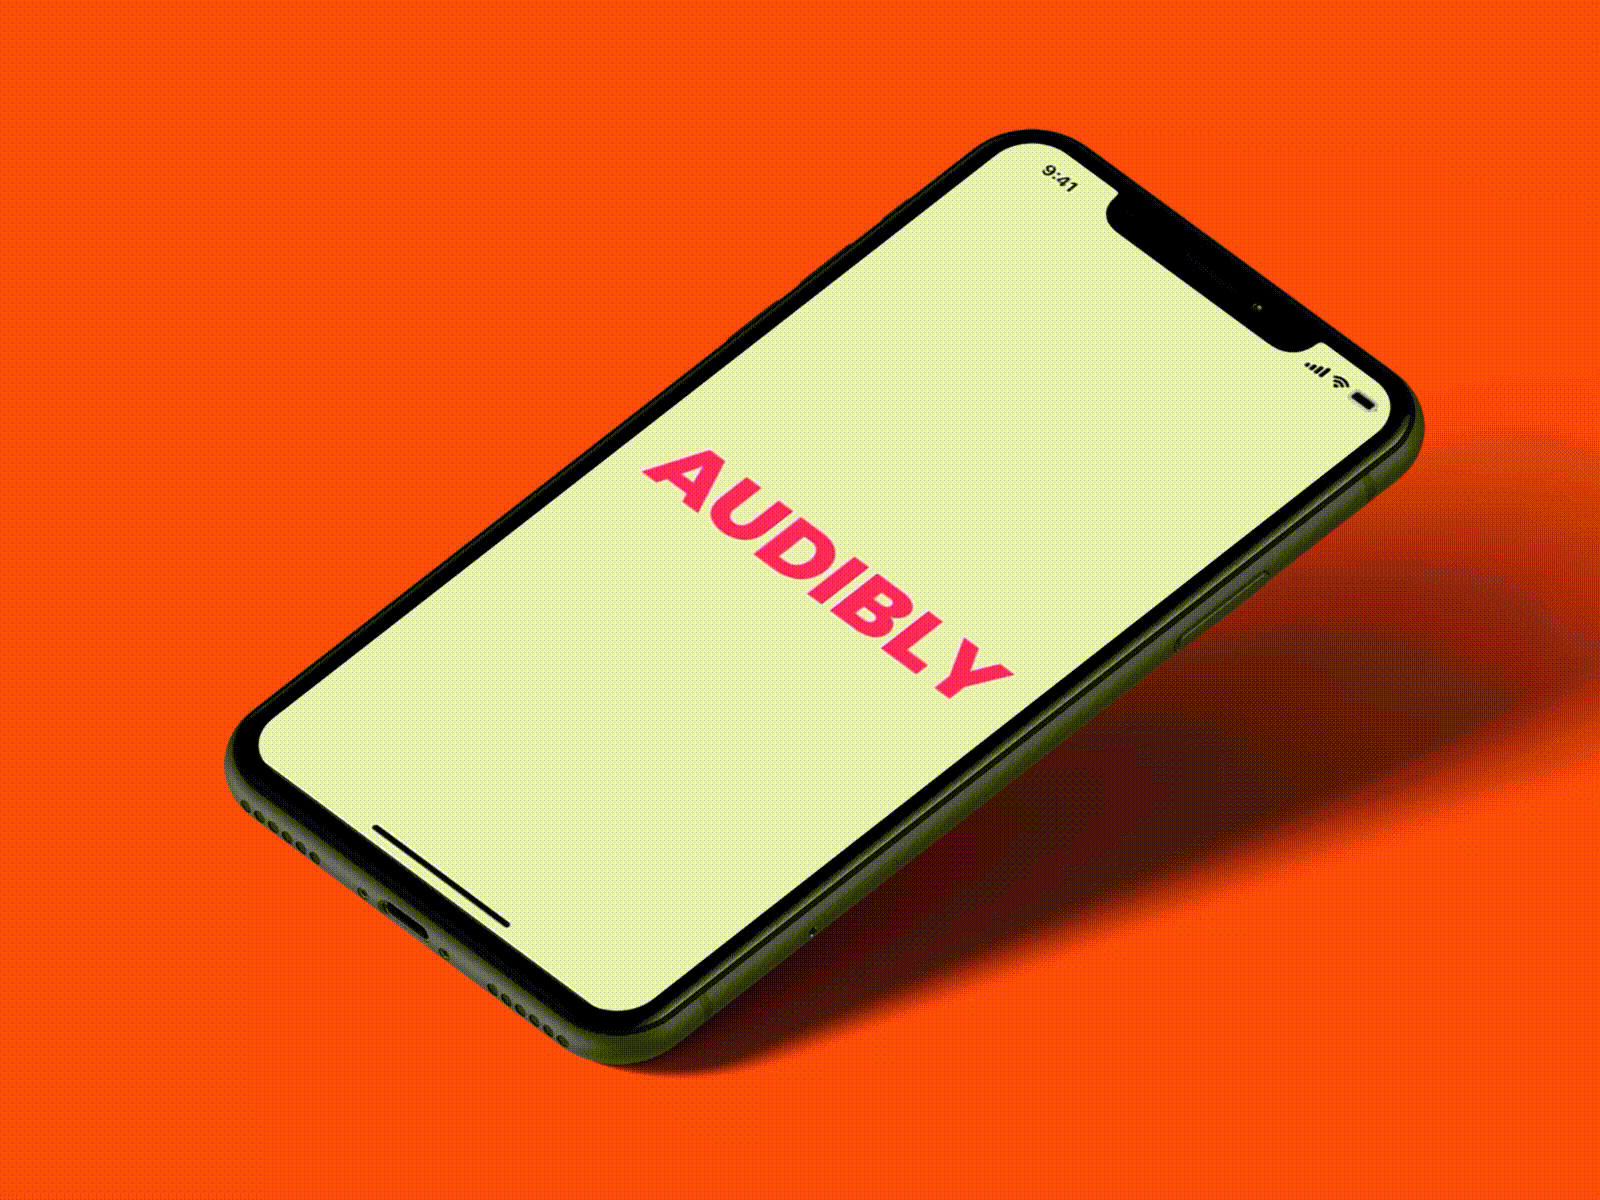 Audibly (Concept) audible audibook audio app audiobook audiobooks audioplayer cast favorite micro interaction micro interactions microinteraction music music app play pocketcast podcast podcast app podcasting scribe subscribe